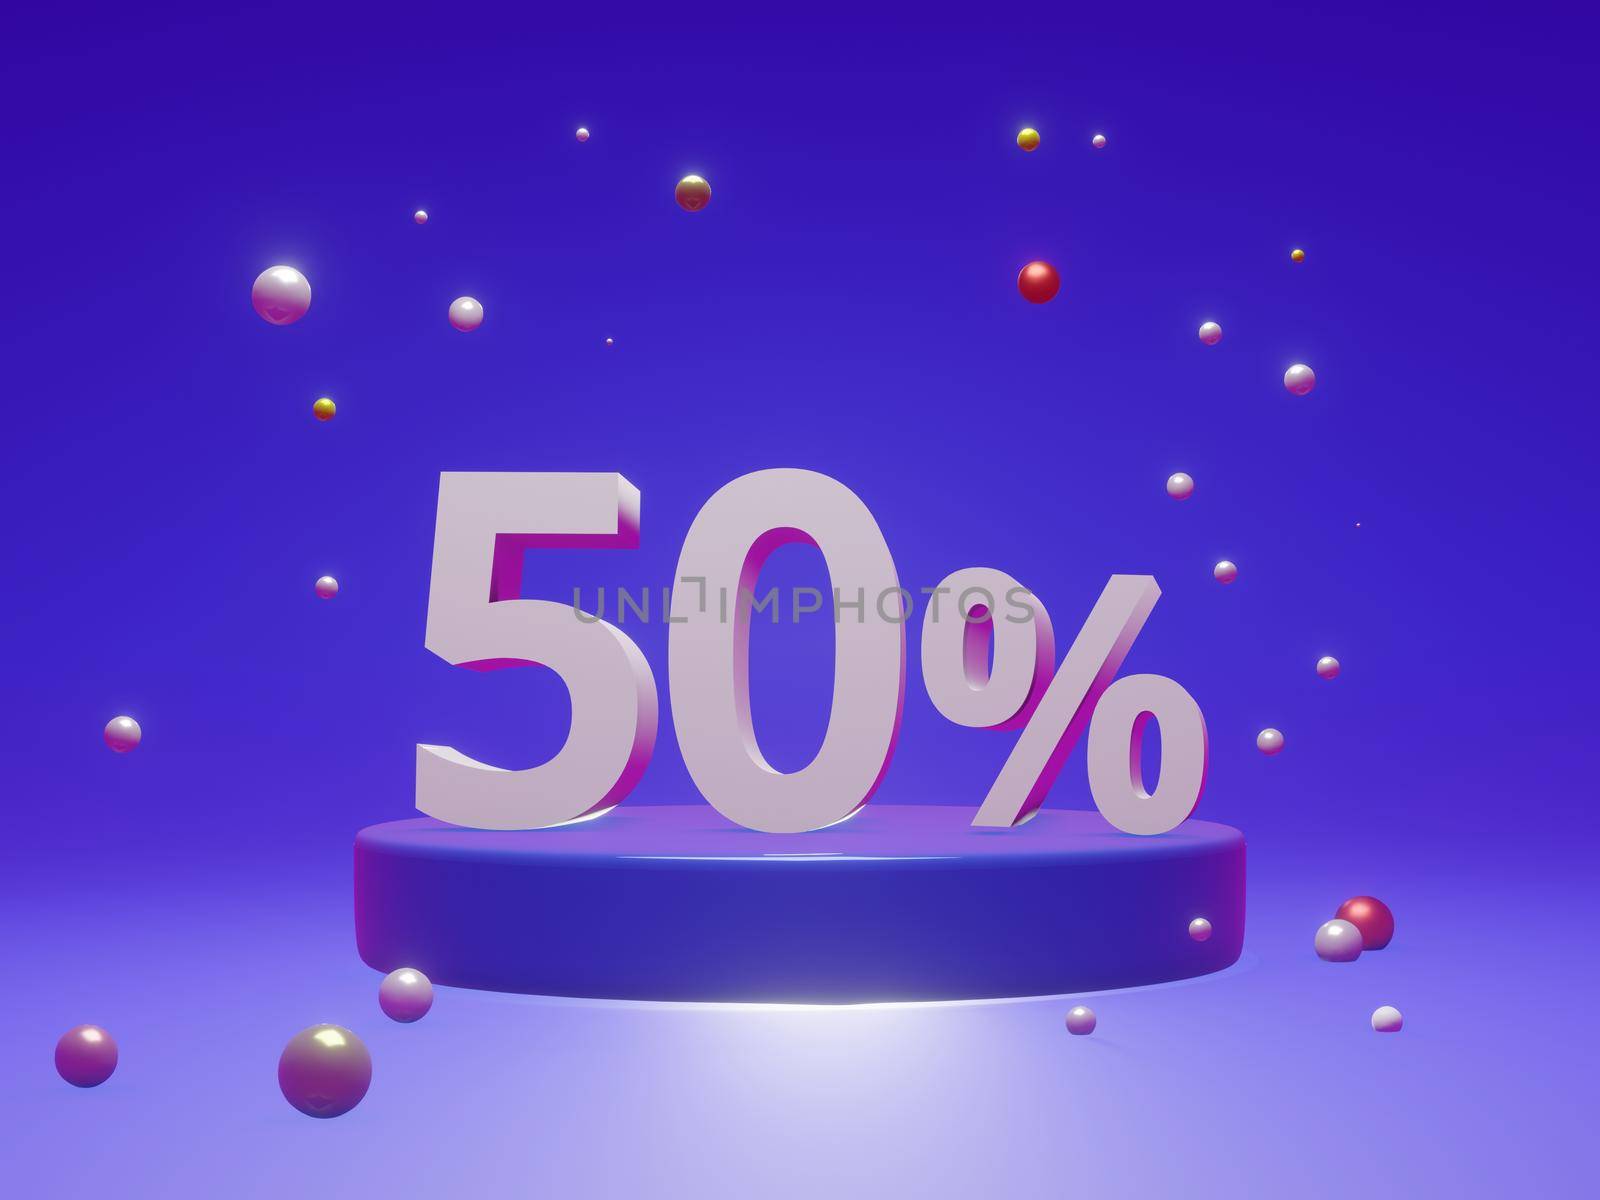 The podium shows up to 50% off discount concept banners, promotional sales, and super shopping offer banners. 3D rendering. by noppha80